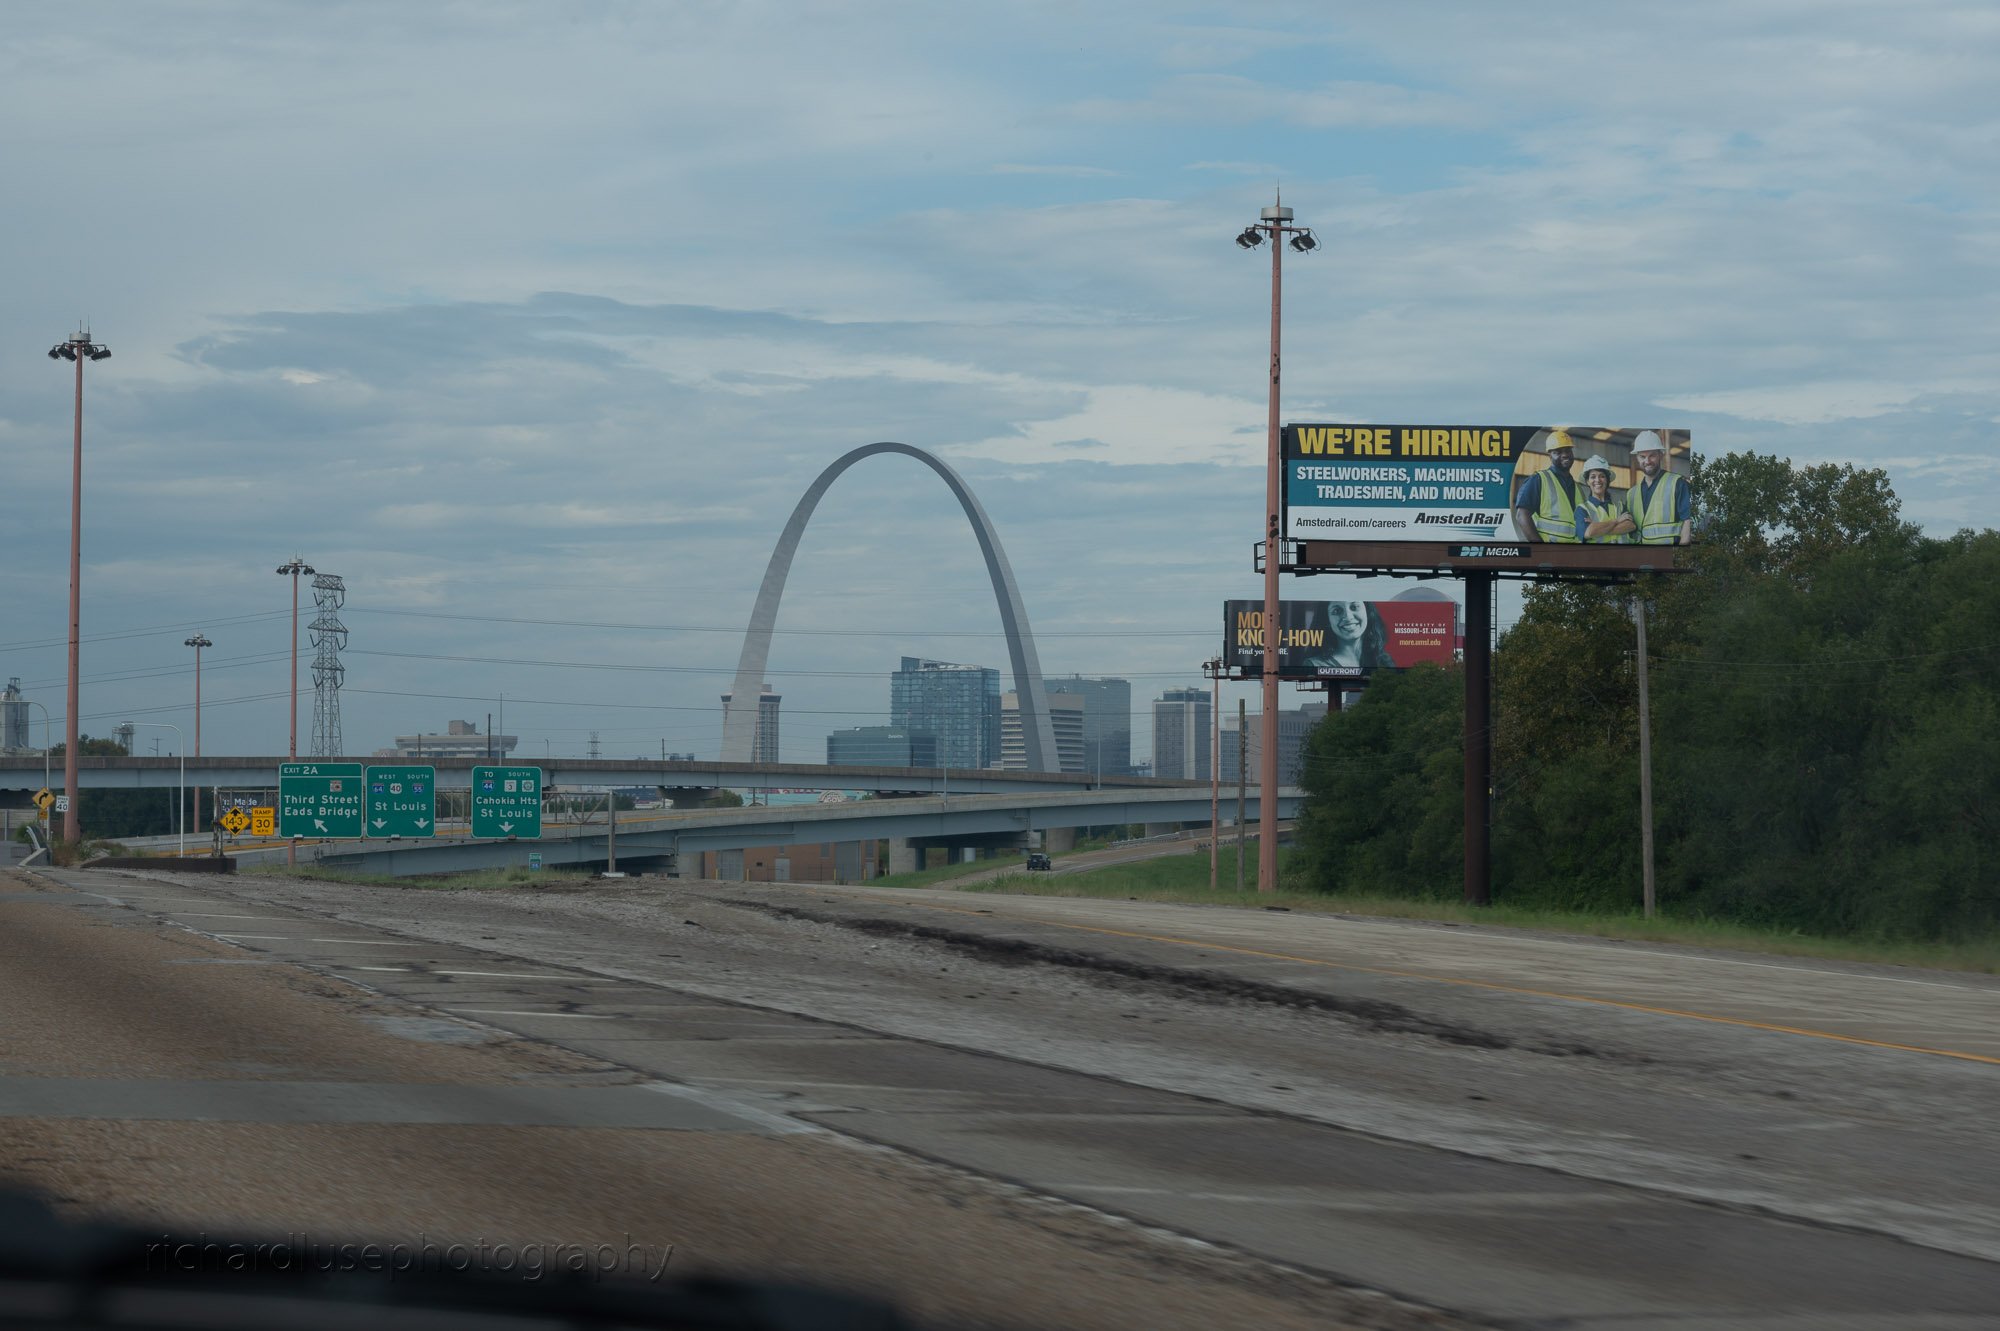 After an overnight in Ohio, on to St louis and heading to OK